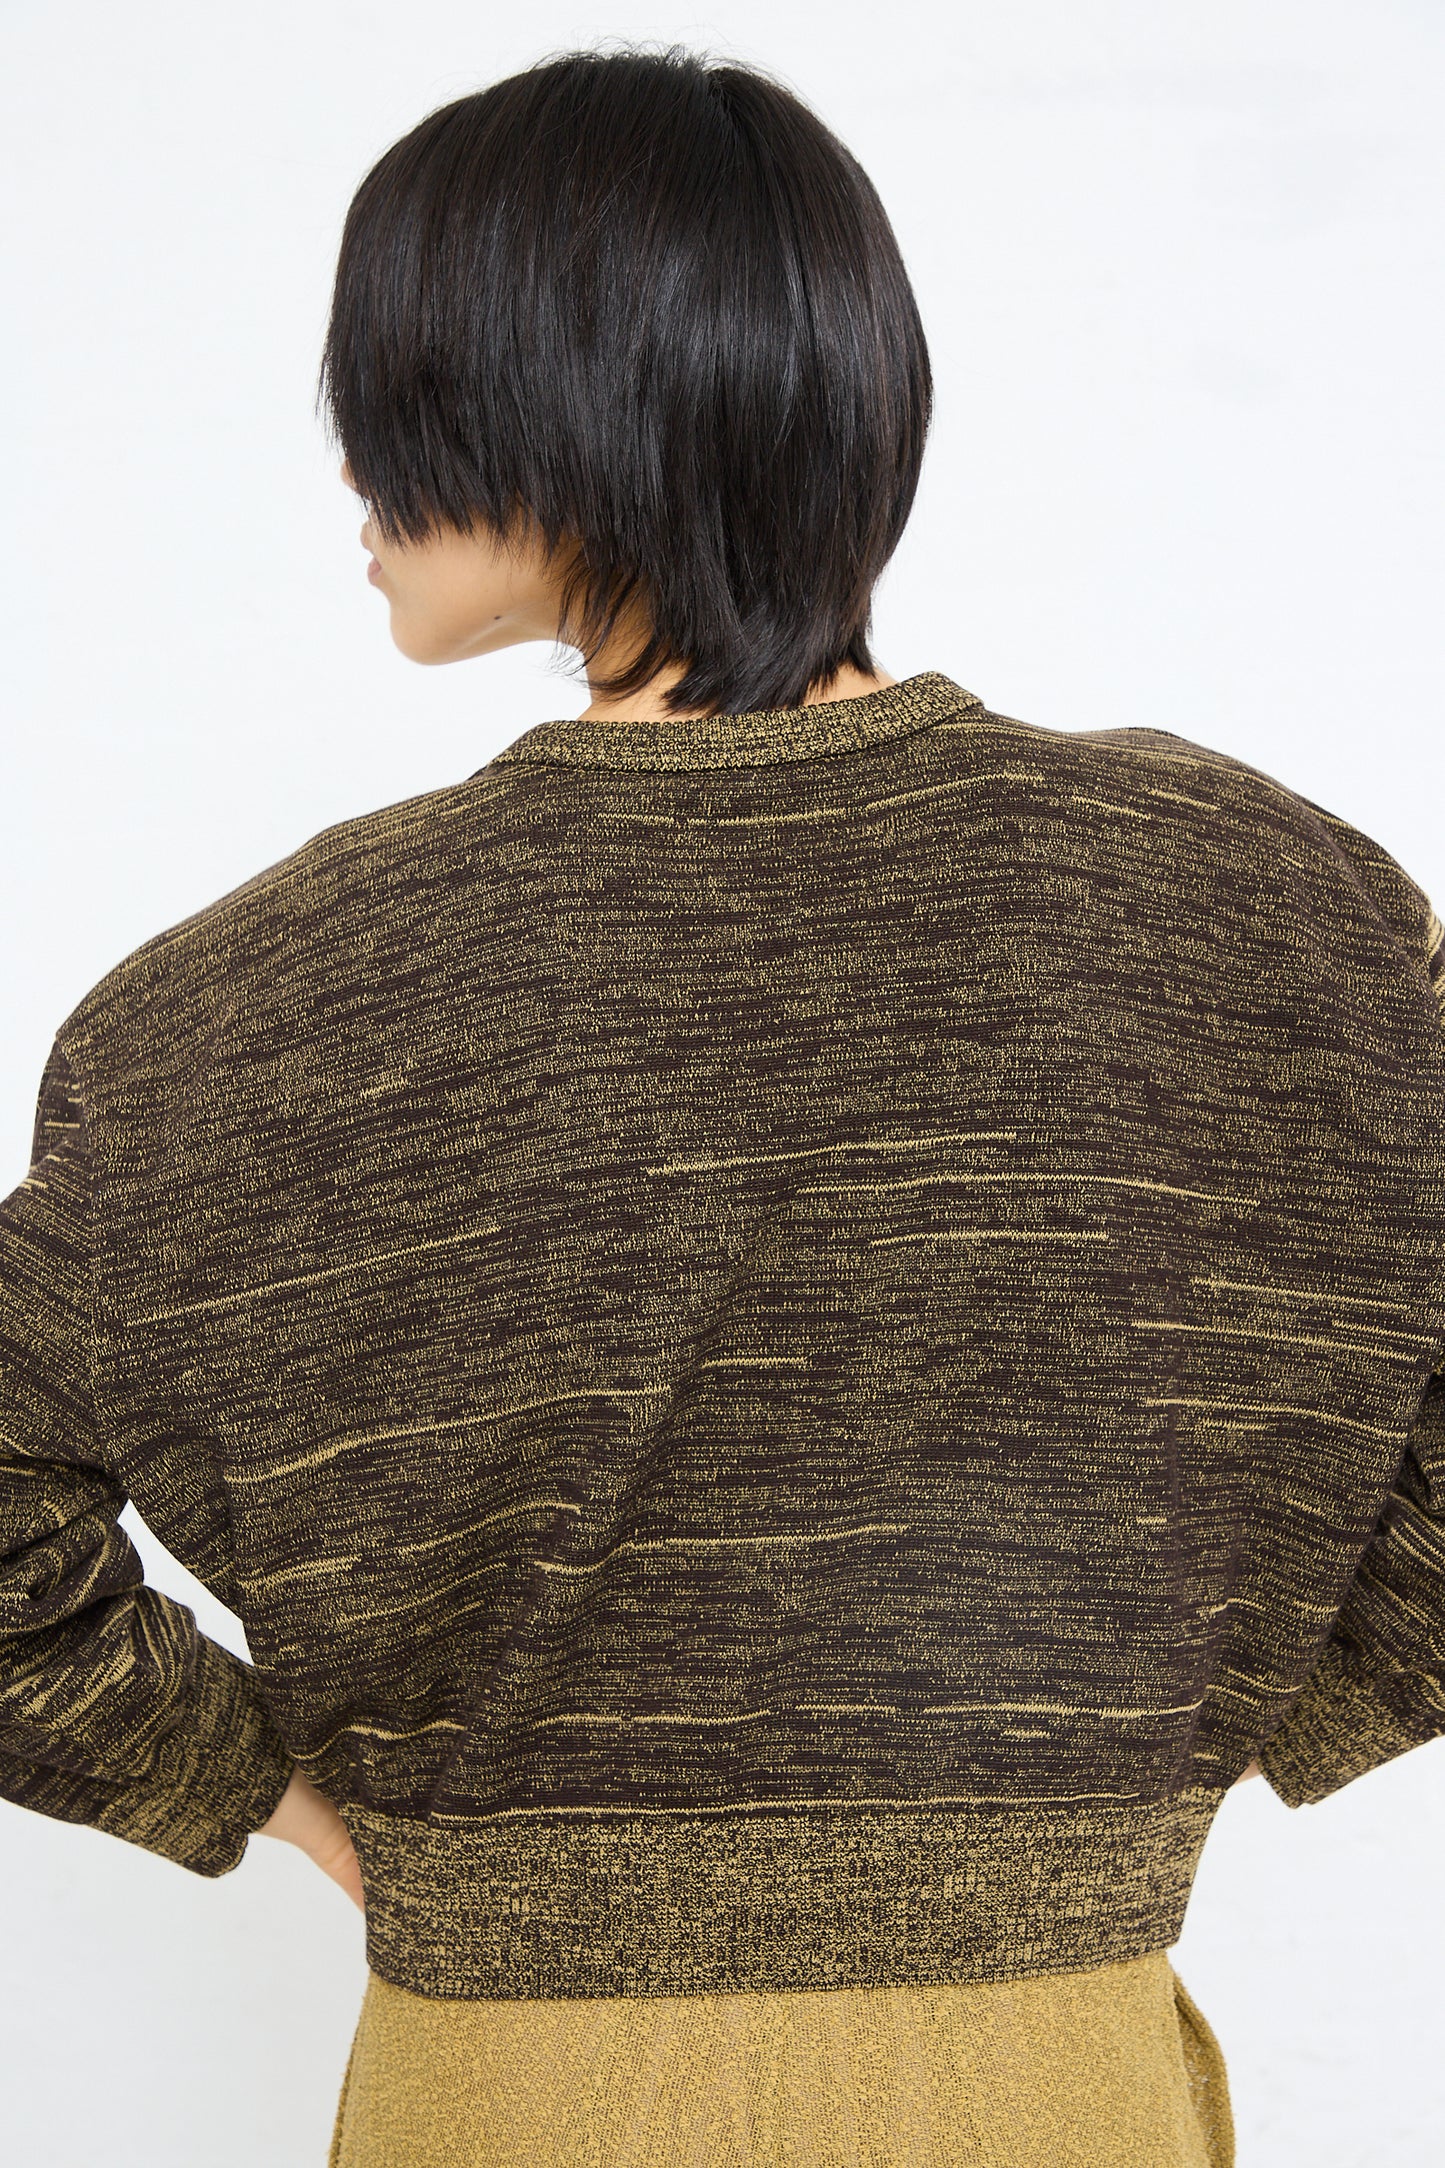 A person from behind wearing a Veronique Leroy multi-color knit, textured gold and black Cotton Boxy Sweater in Pepper with a cropped, dark hairstyle.